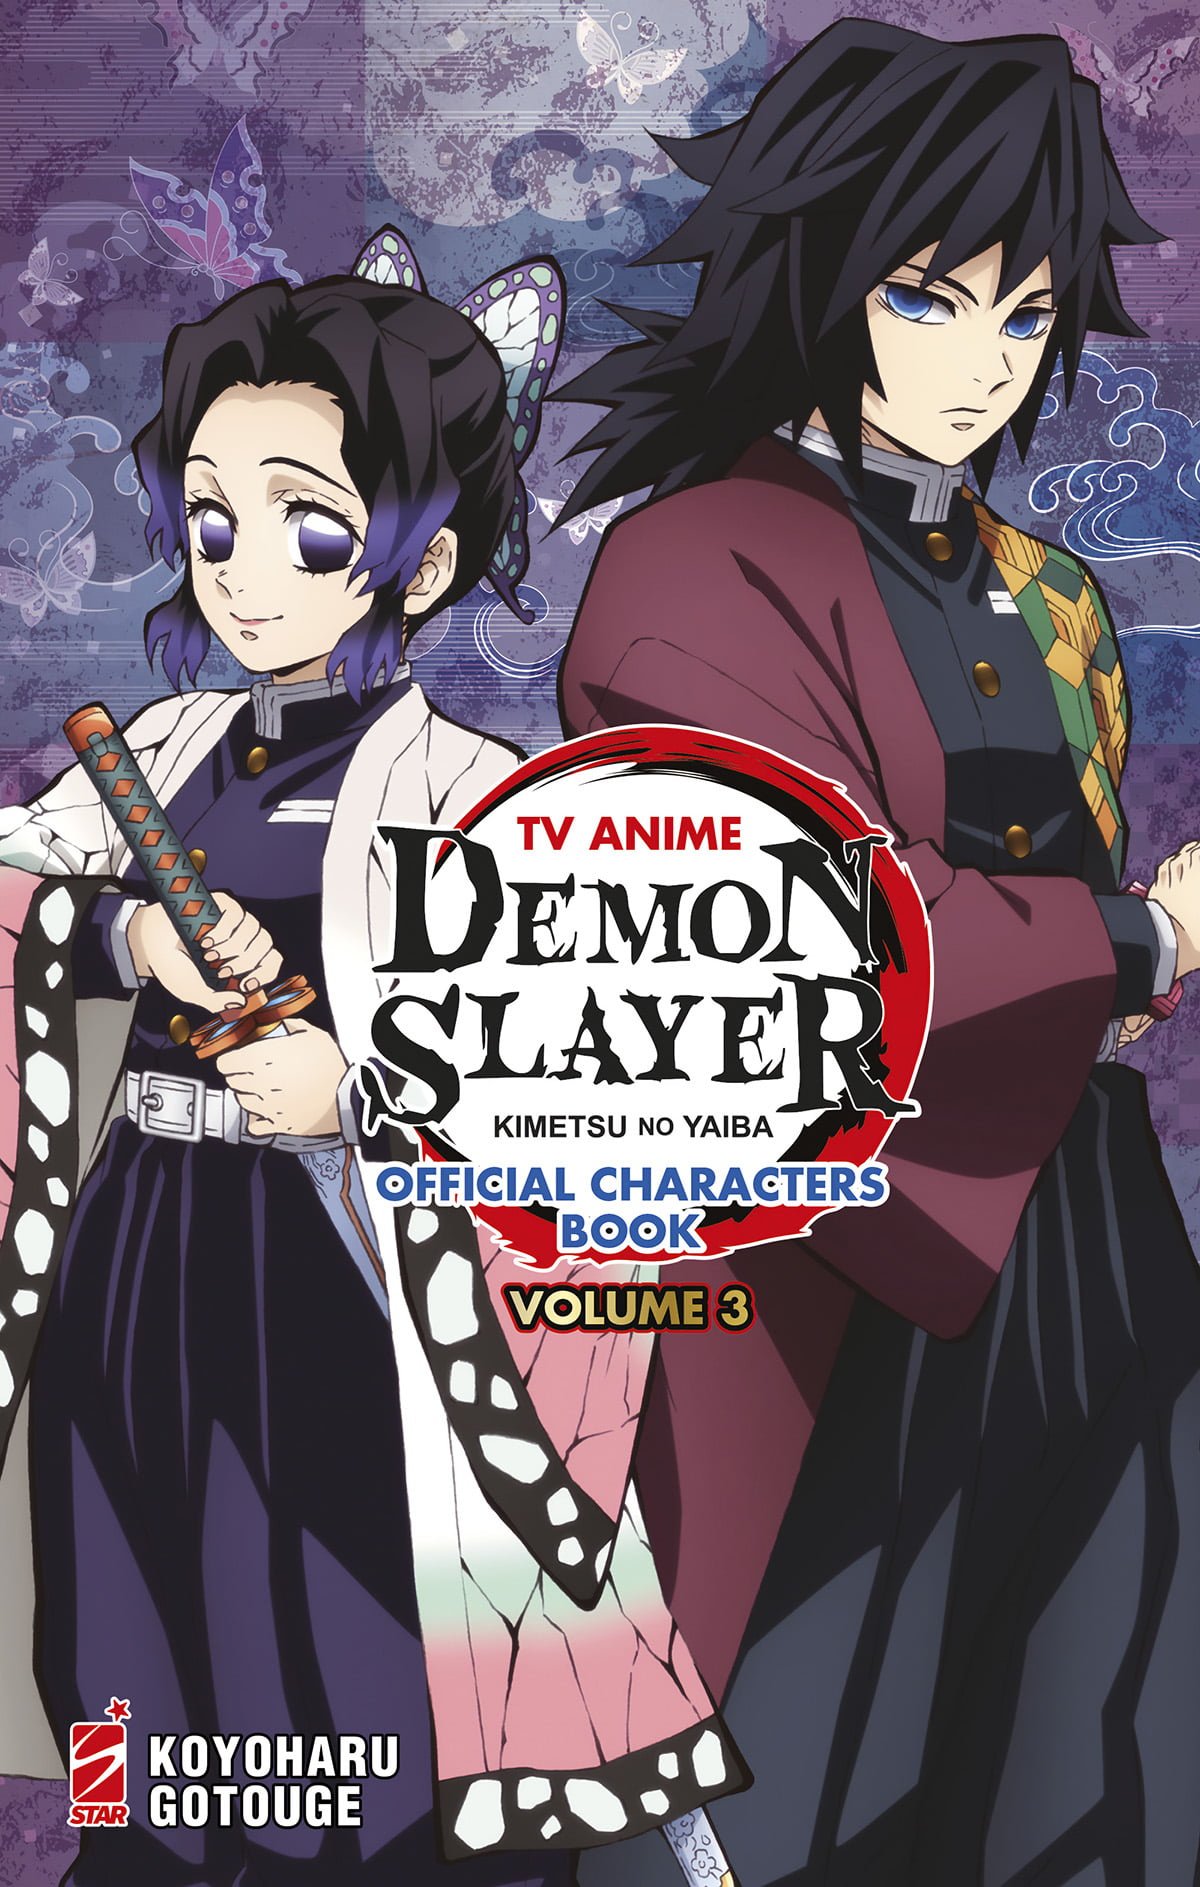 DEMON SLAYER TV ANIME OFFICIAL CHARACTERS BOOK 3 DI 3